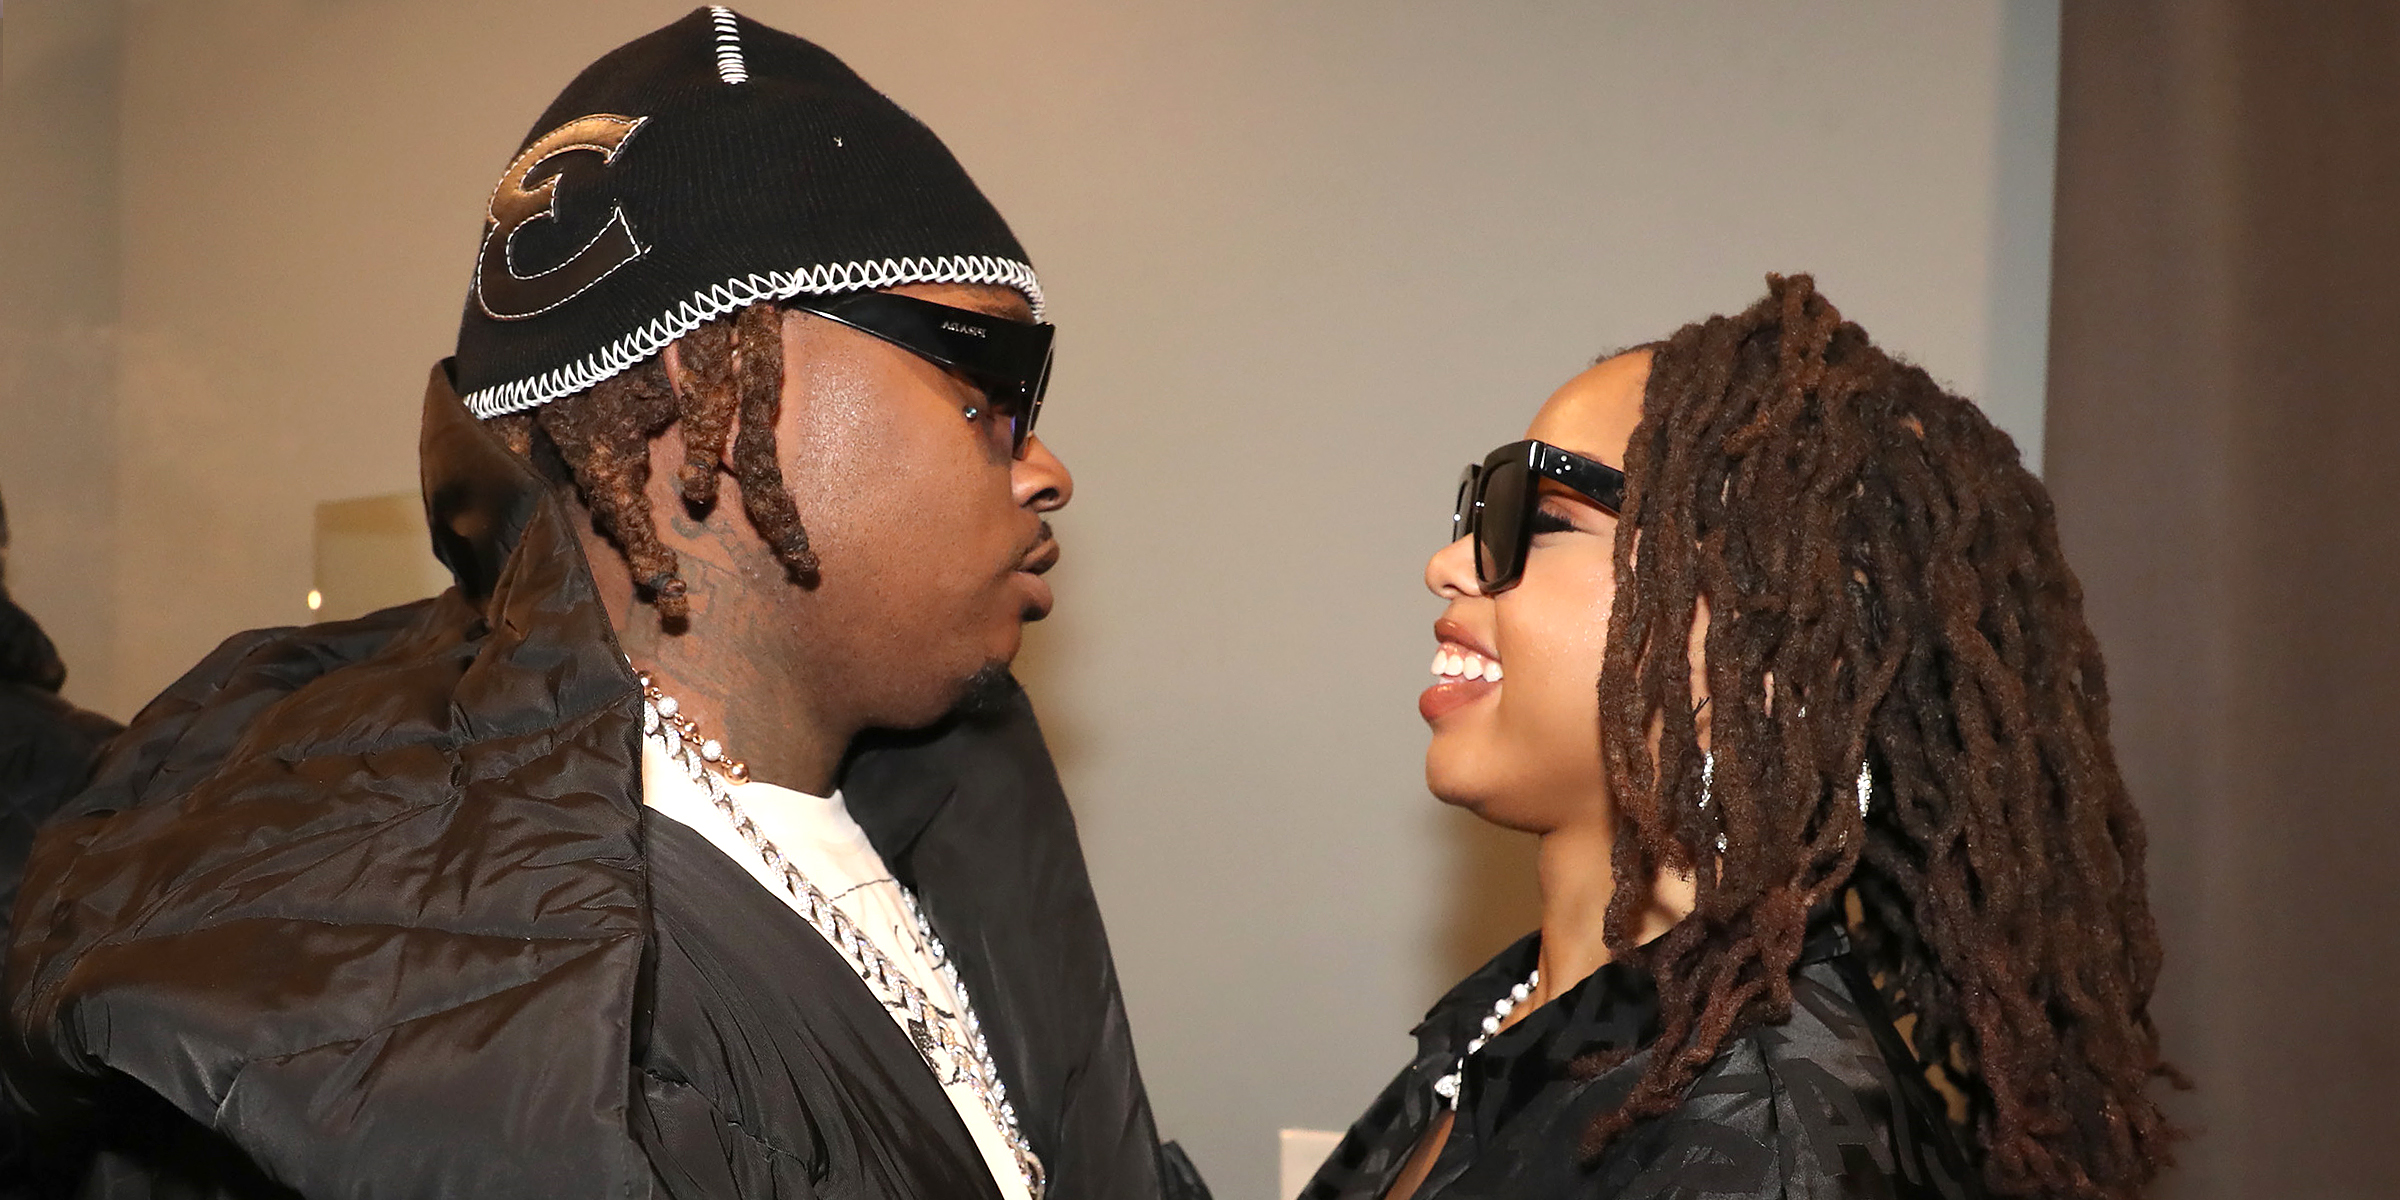 Rapper Gunna and Chloe Bailey | Source: Getty Images